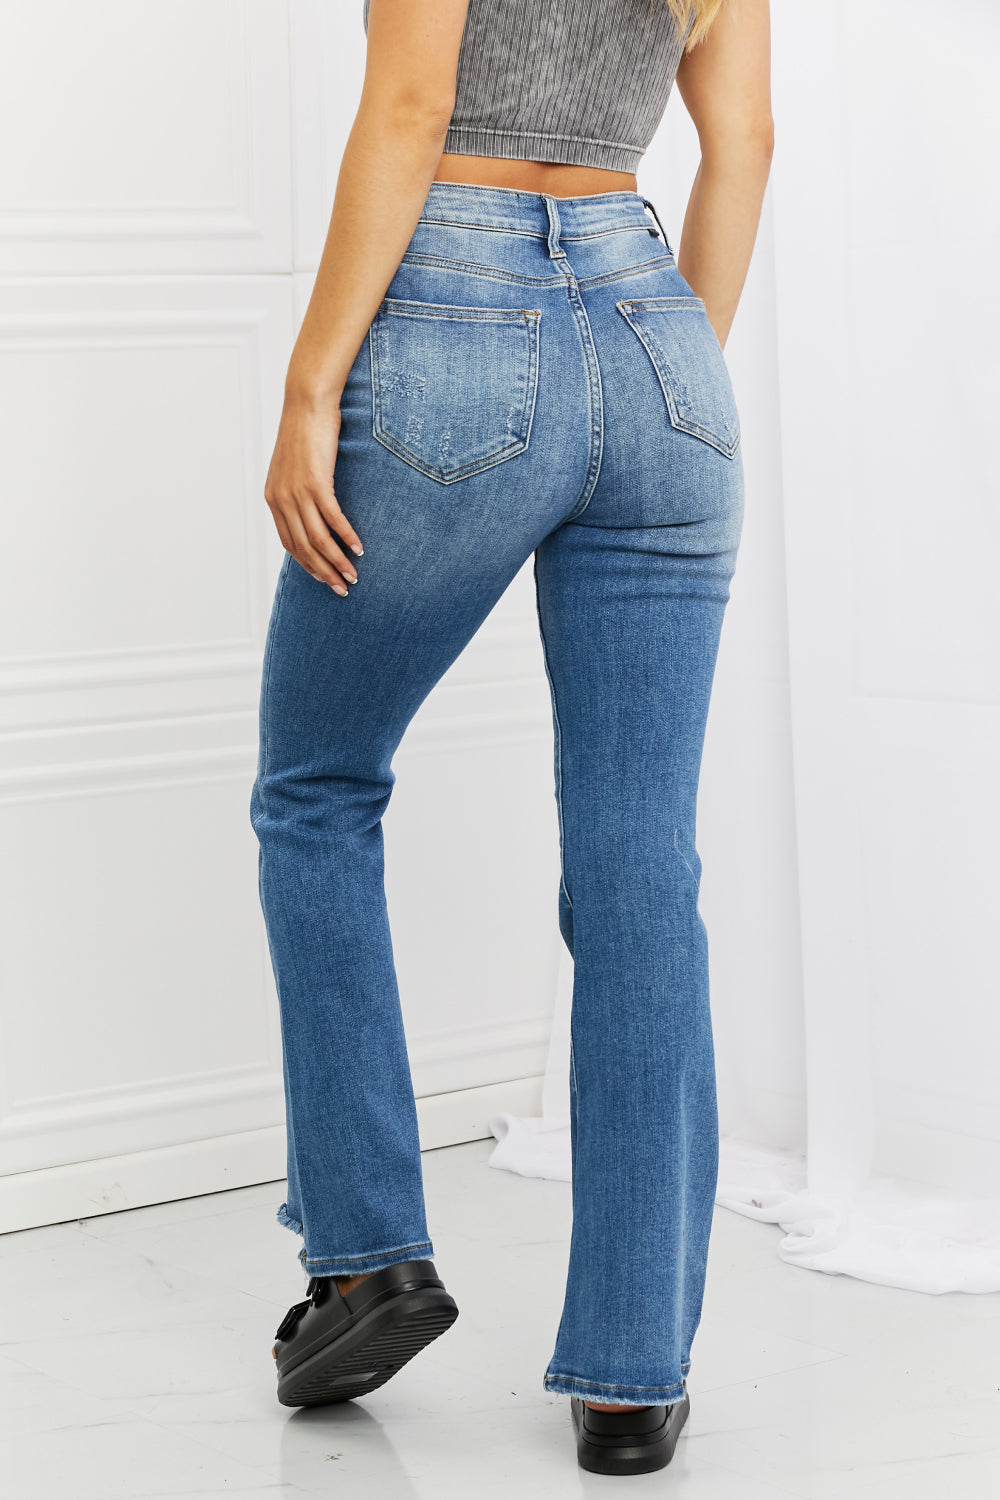 RISEN Full Size Iris High Waisted Flare Jeans Print on any thing USA/STOD clothes